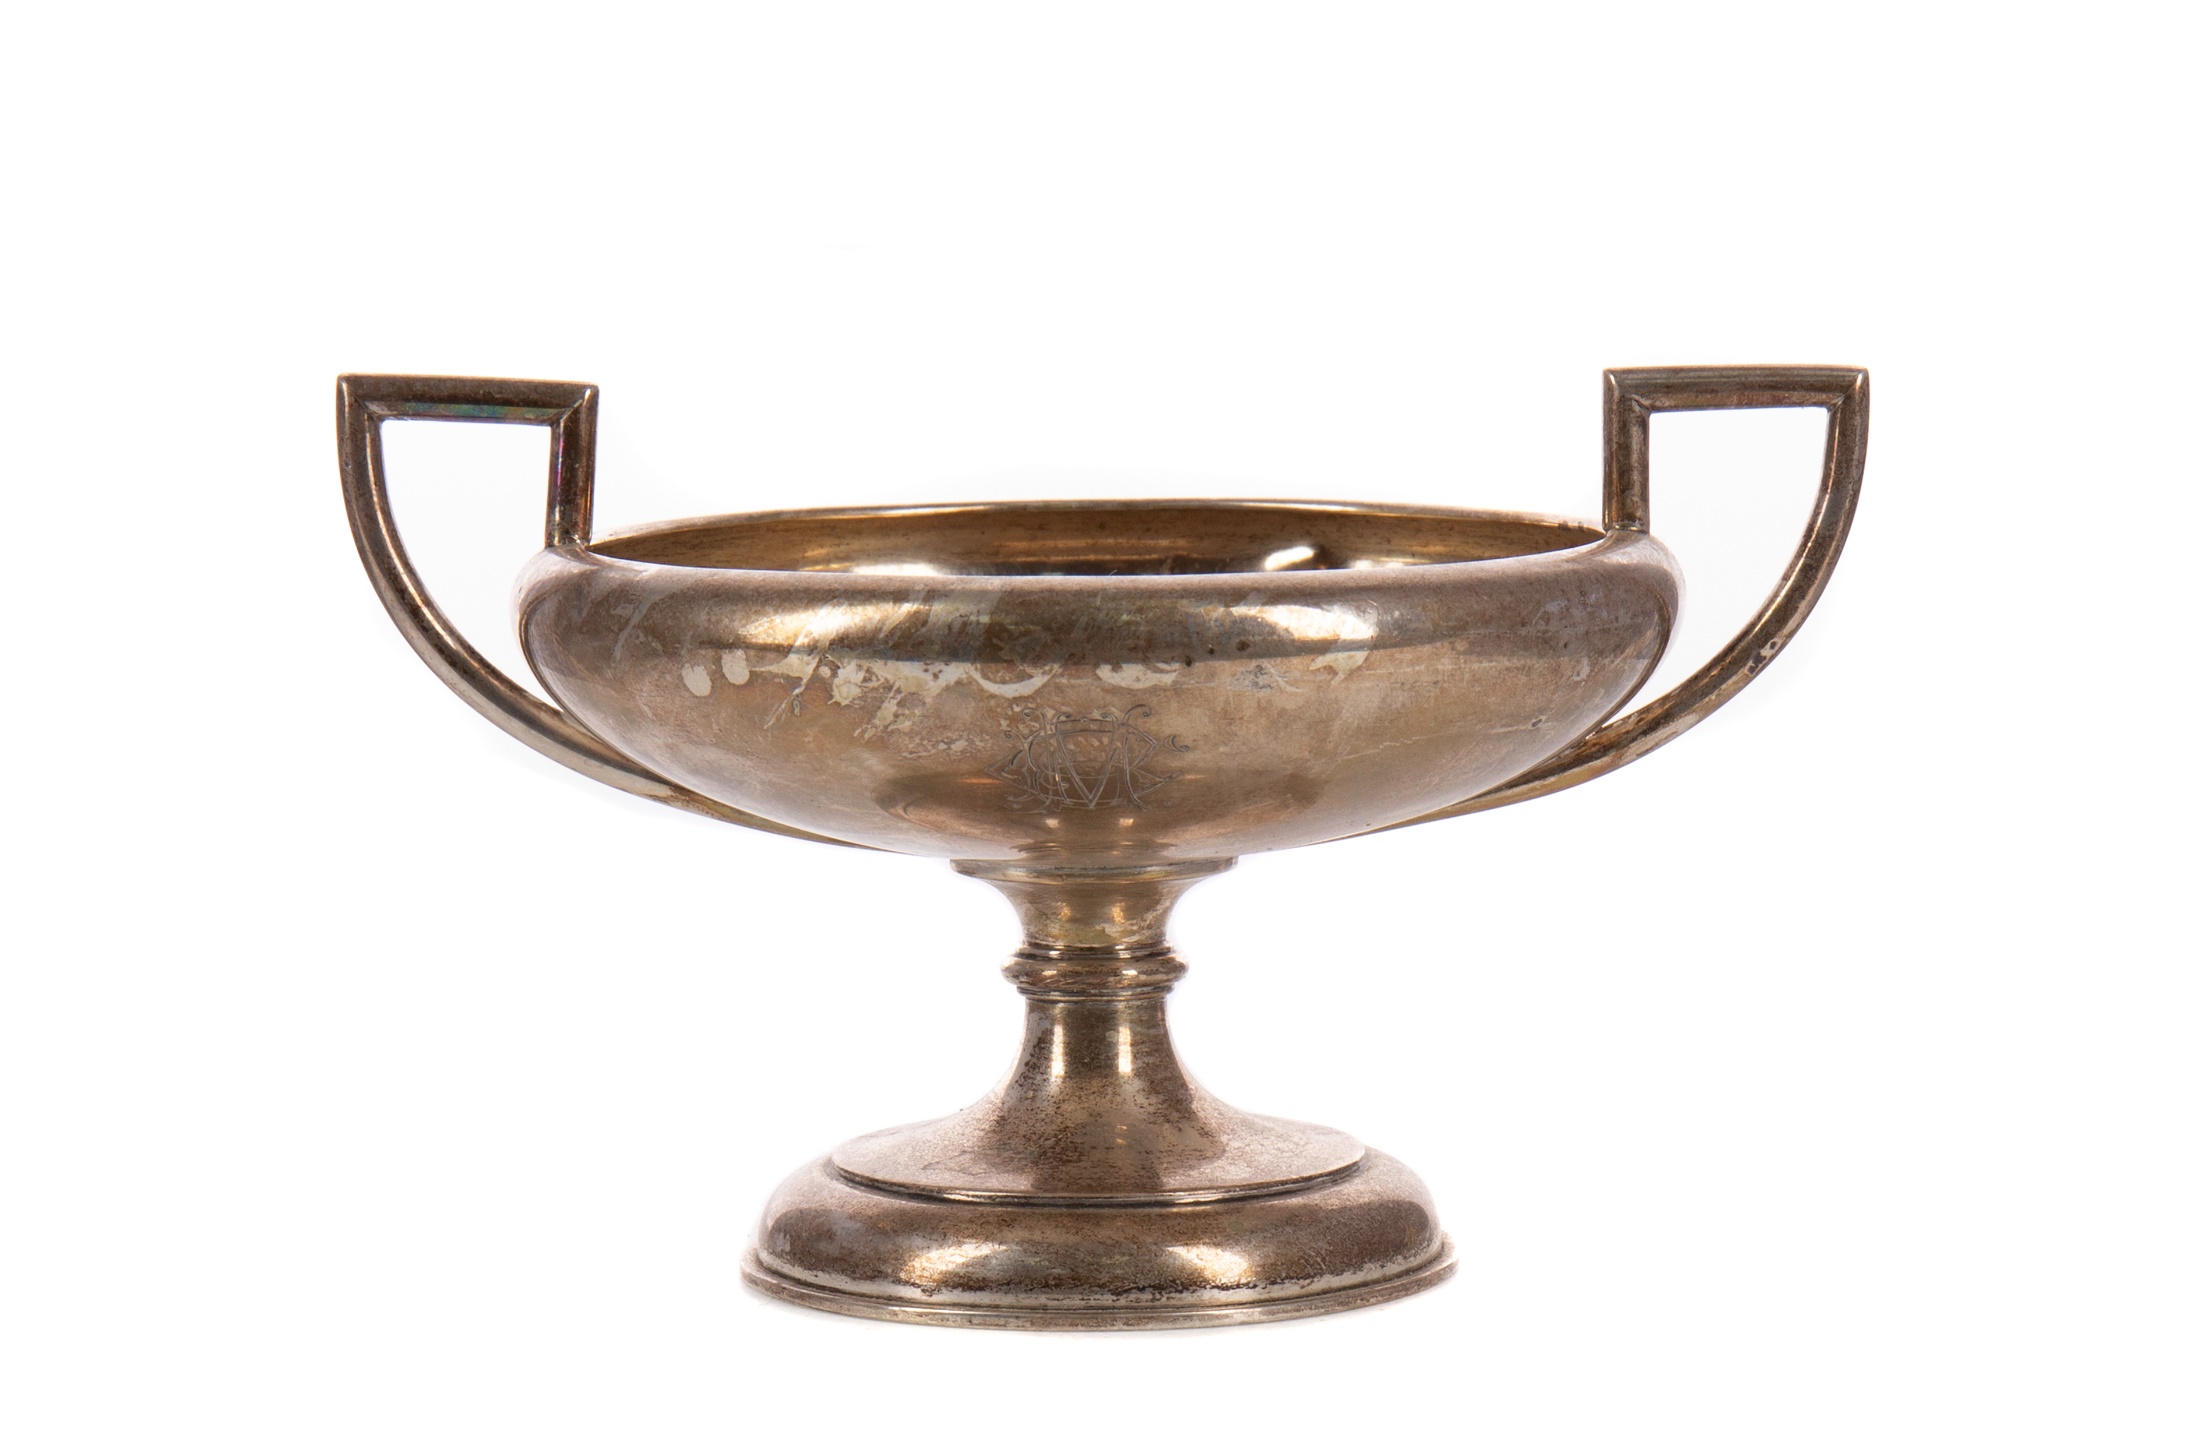 A SILVER TWIN-HANDLED PEDESTAL BOWL BY DAVID ANDERSEN